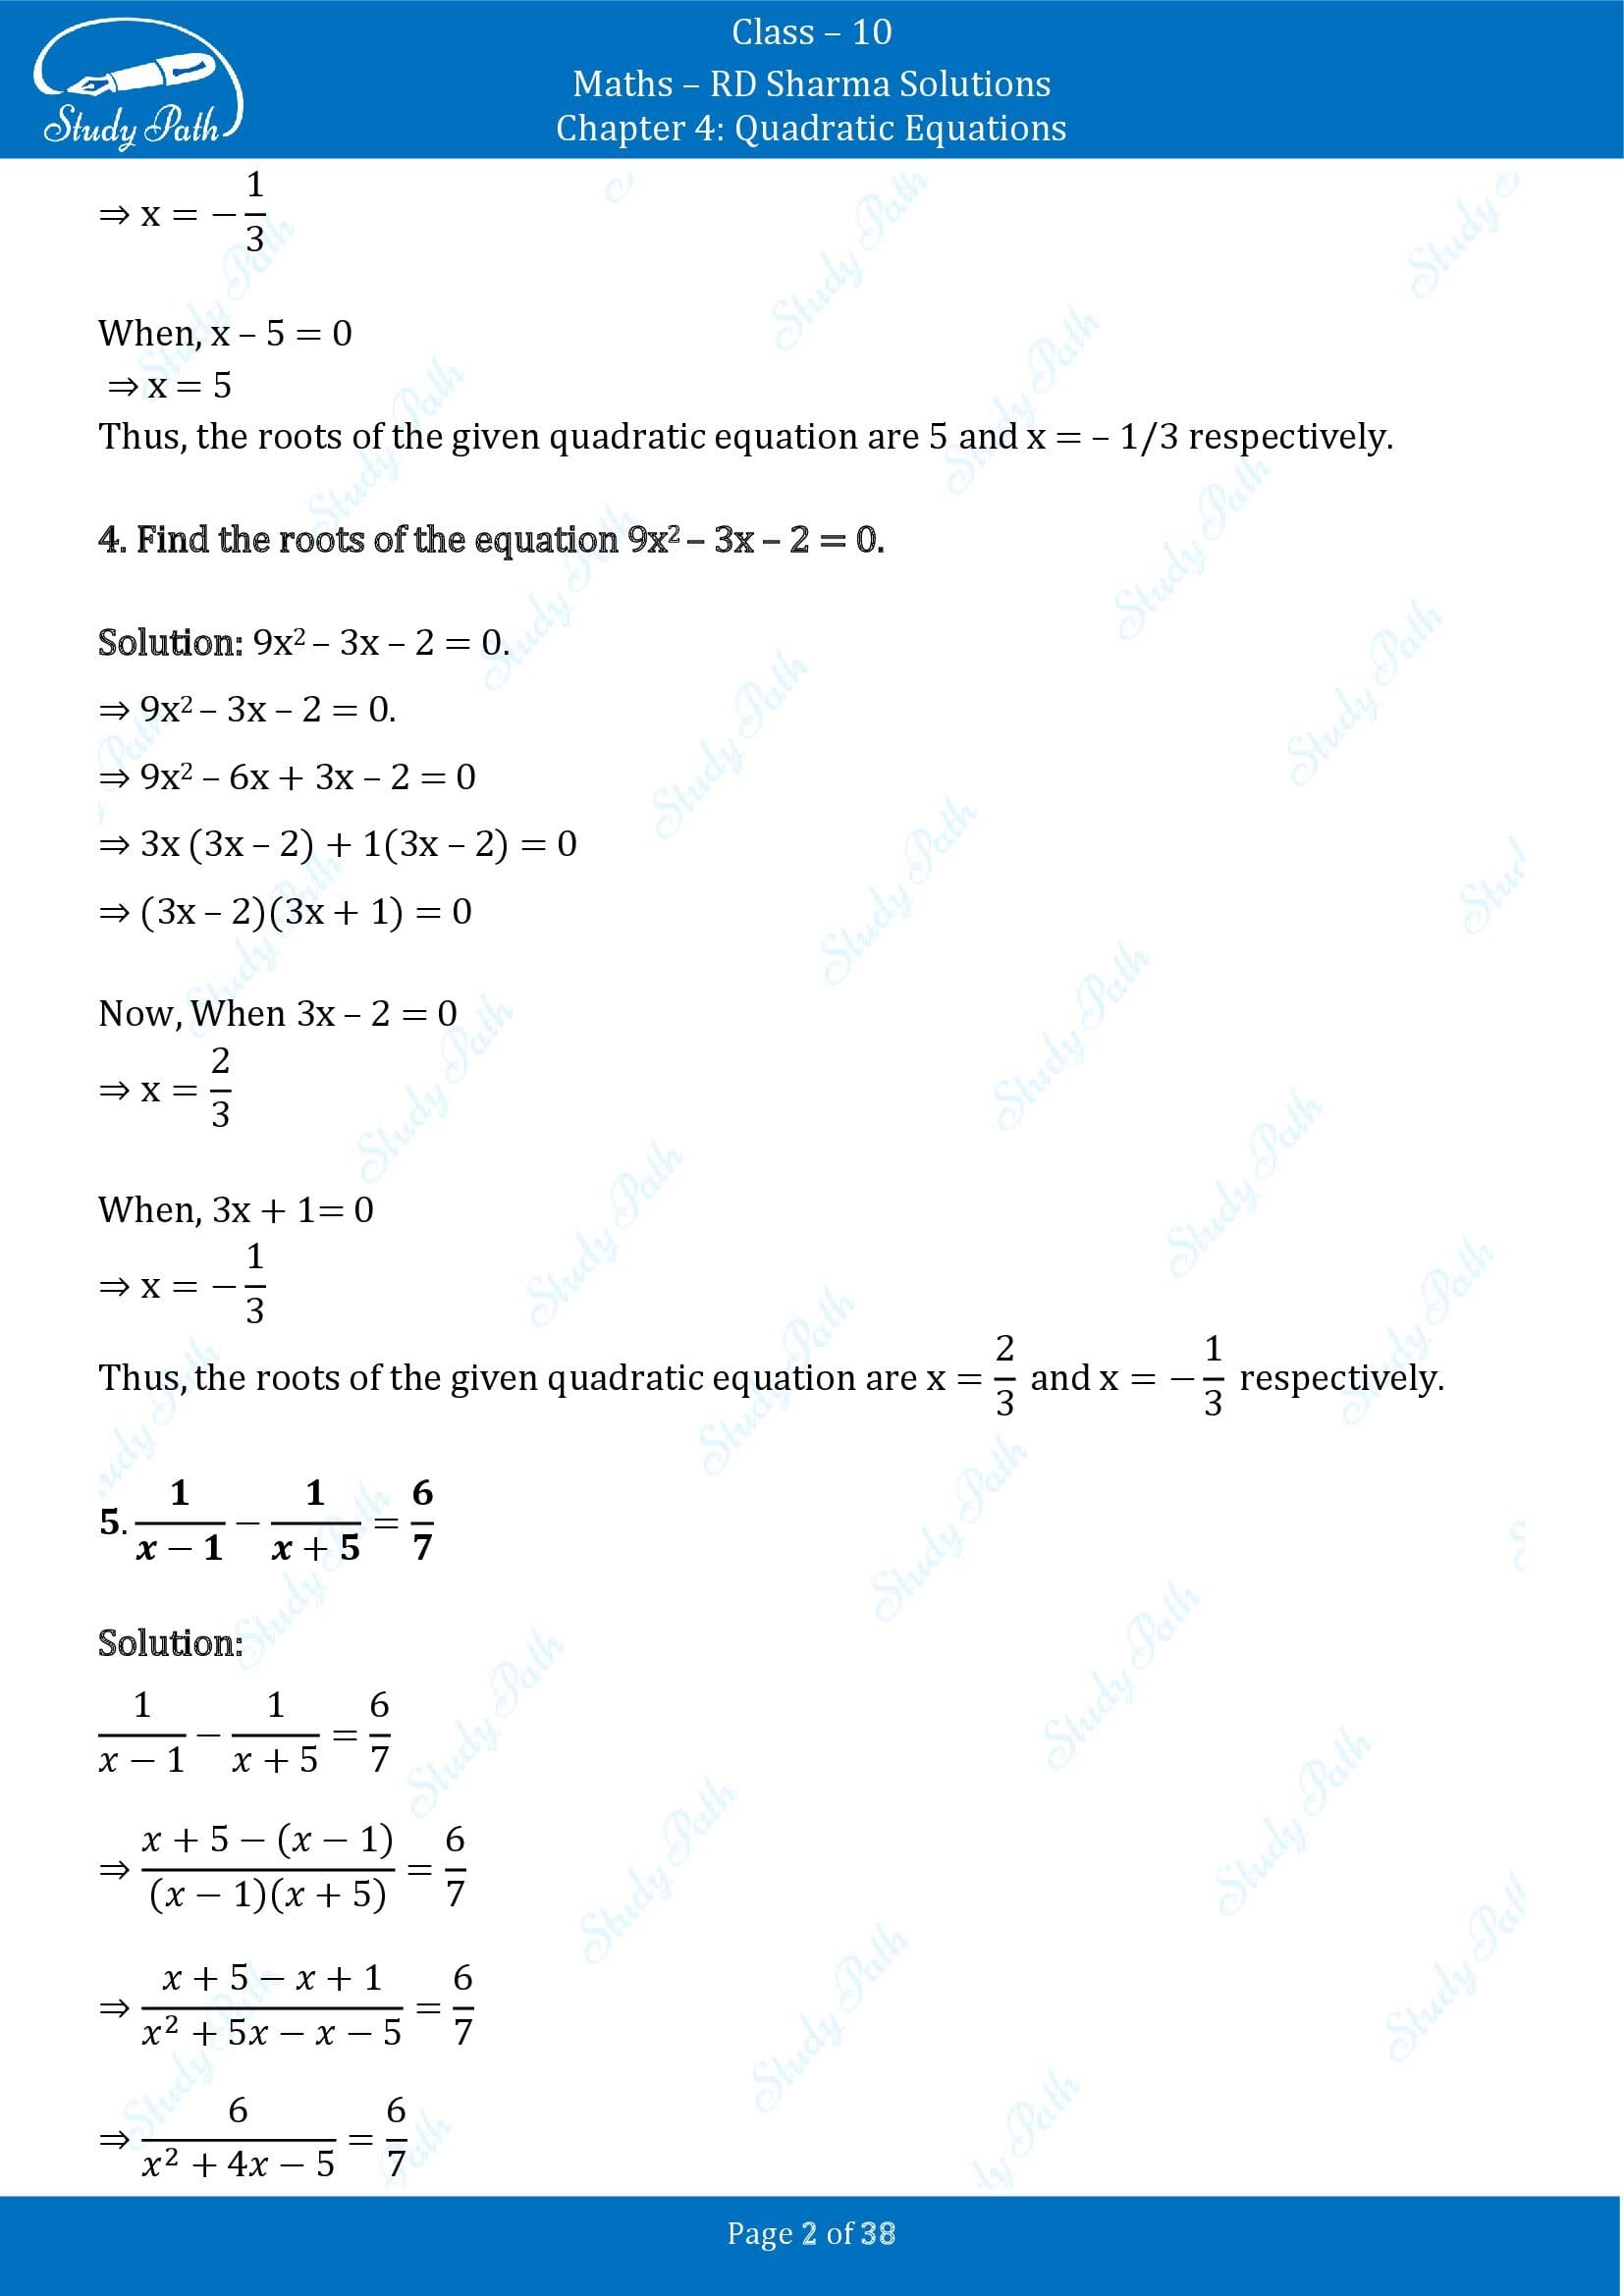 RD Sharma Solutions Class 10 Chapter 4 Quadratic Equations Exercise 4.3 00002